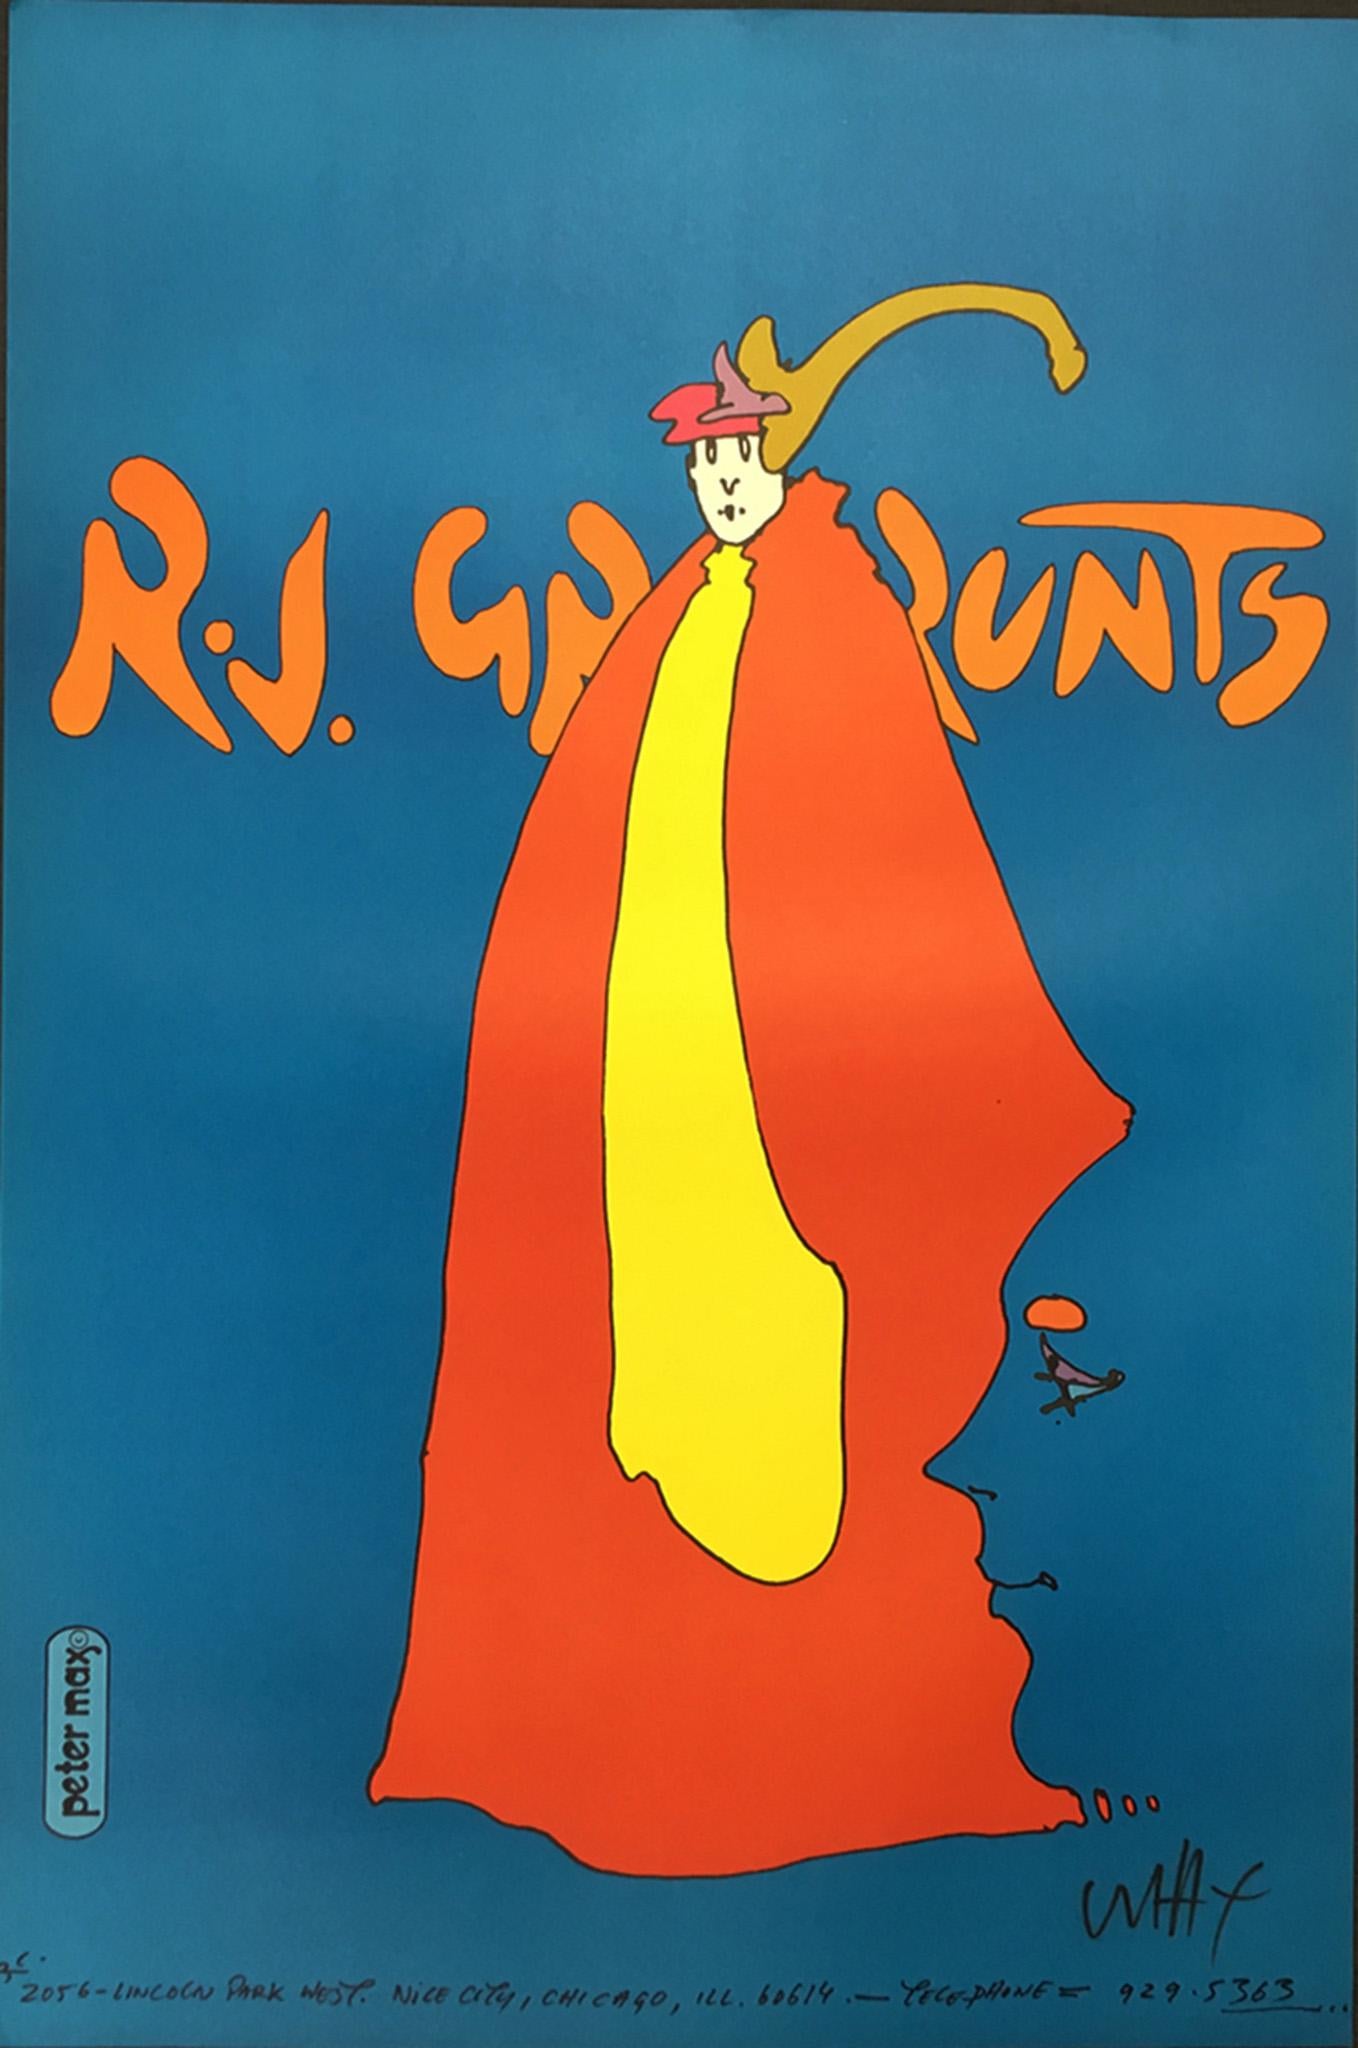 Artist: Peter Max
Title: R.J. Grunts
Year: 1971
Dimensions: 36in. by 24in.
Edition: From the limited edition
Medium: Offset lithograph on premium paper
Condition: Excellent
Signature Details: Hand signed by the artist.